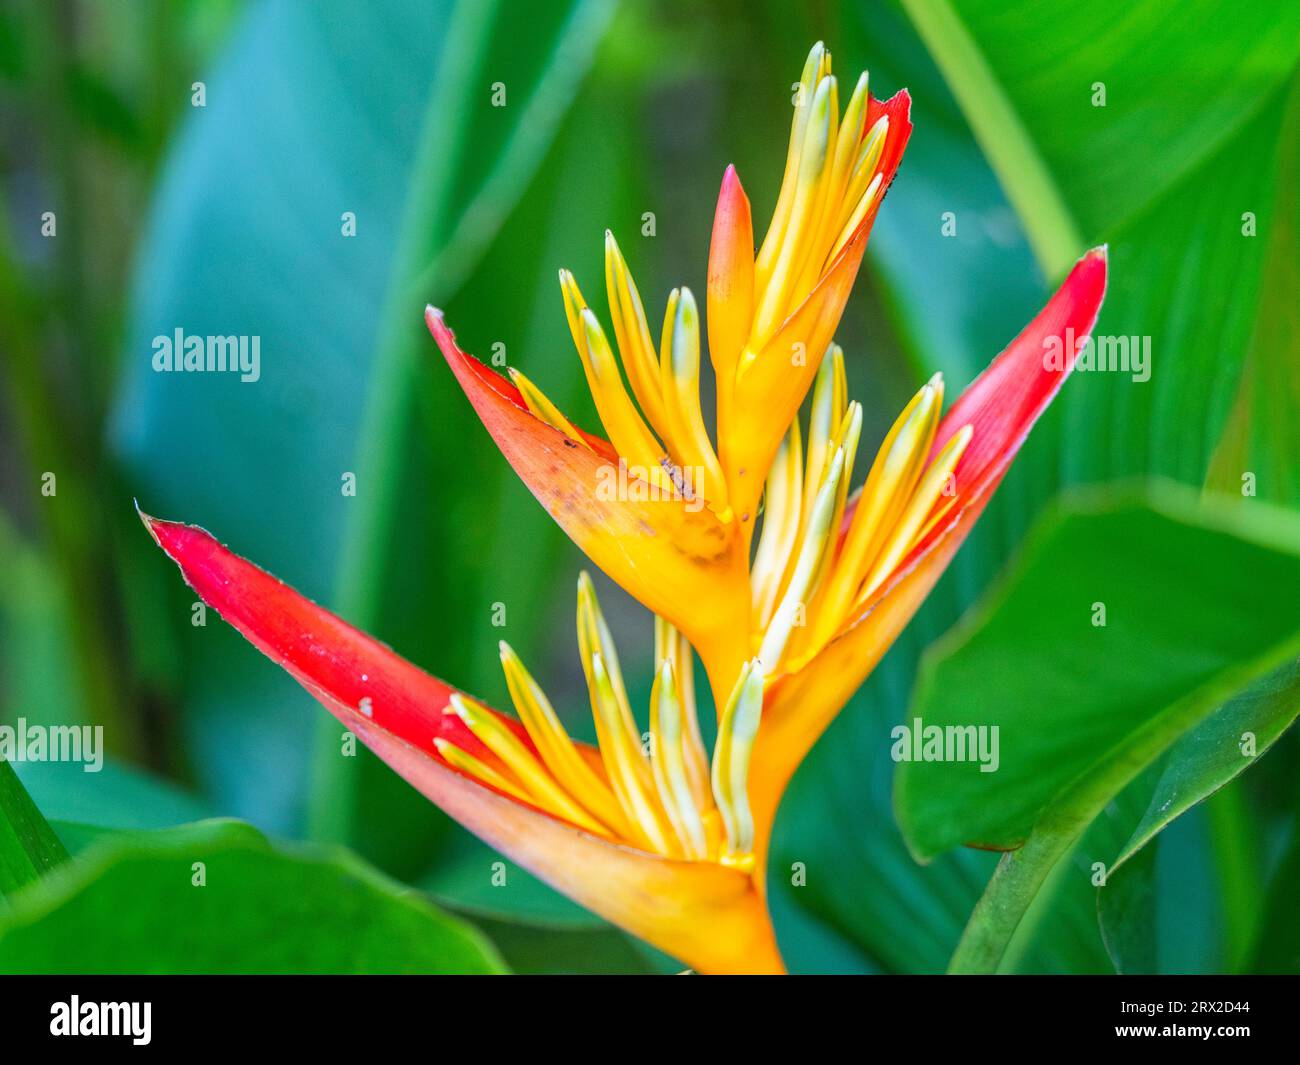 A parrot’s beak heliconia (Heliconia psittacorum) growing in the rainforest at Playa Blanca, Costa Rica, Central America Stock Photo